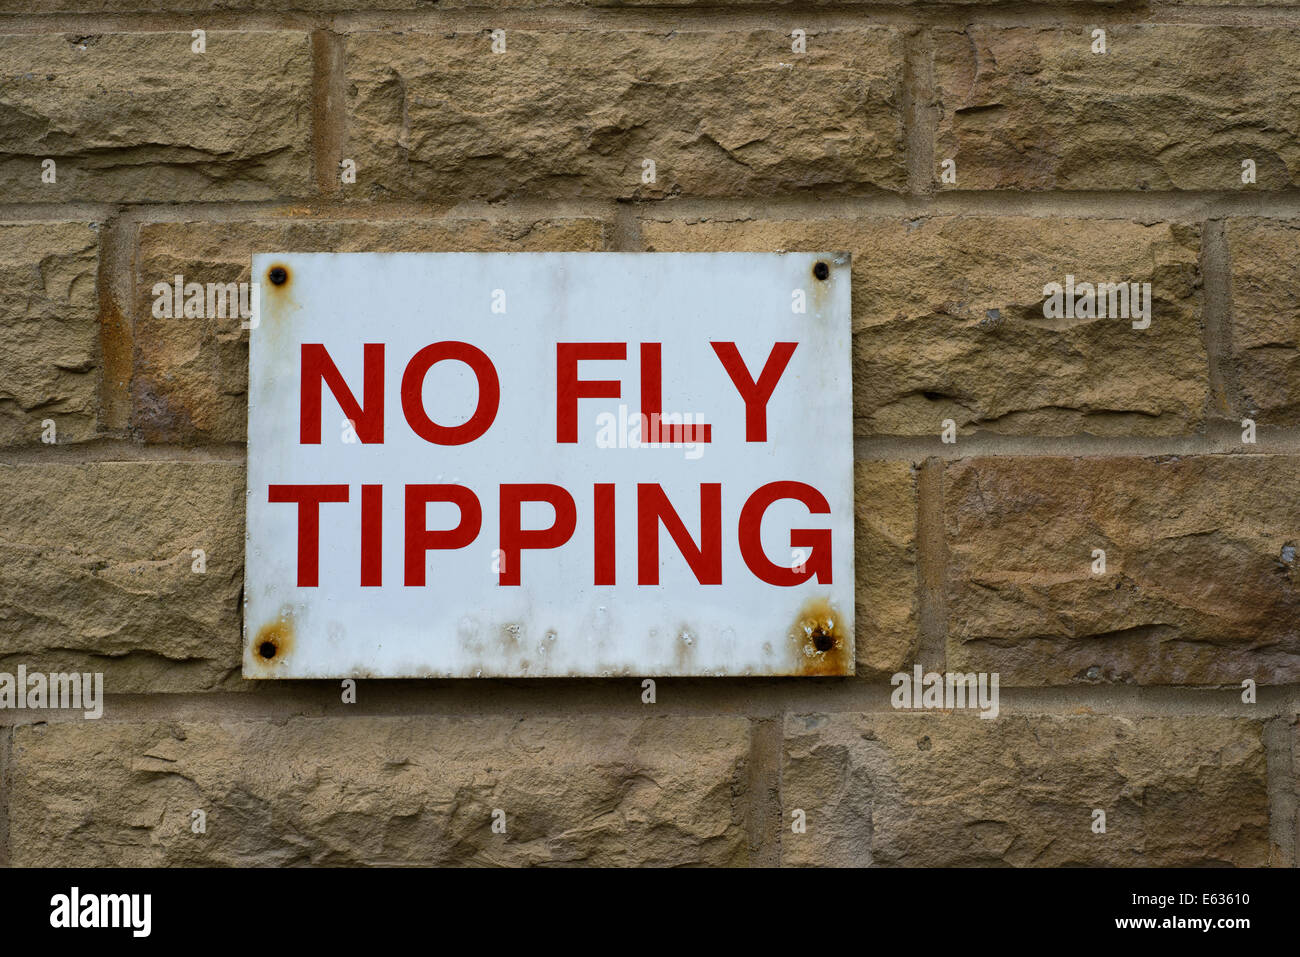 No fly tipping sign on wall Banque D'Images